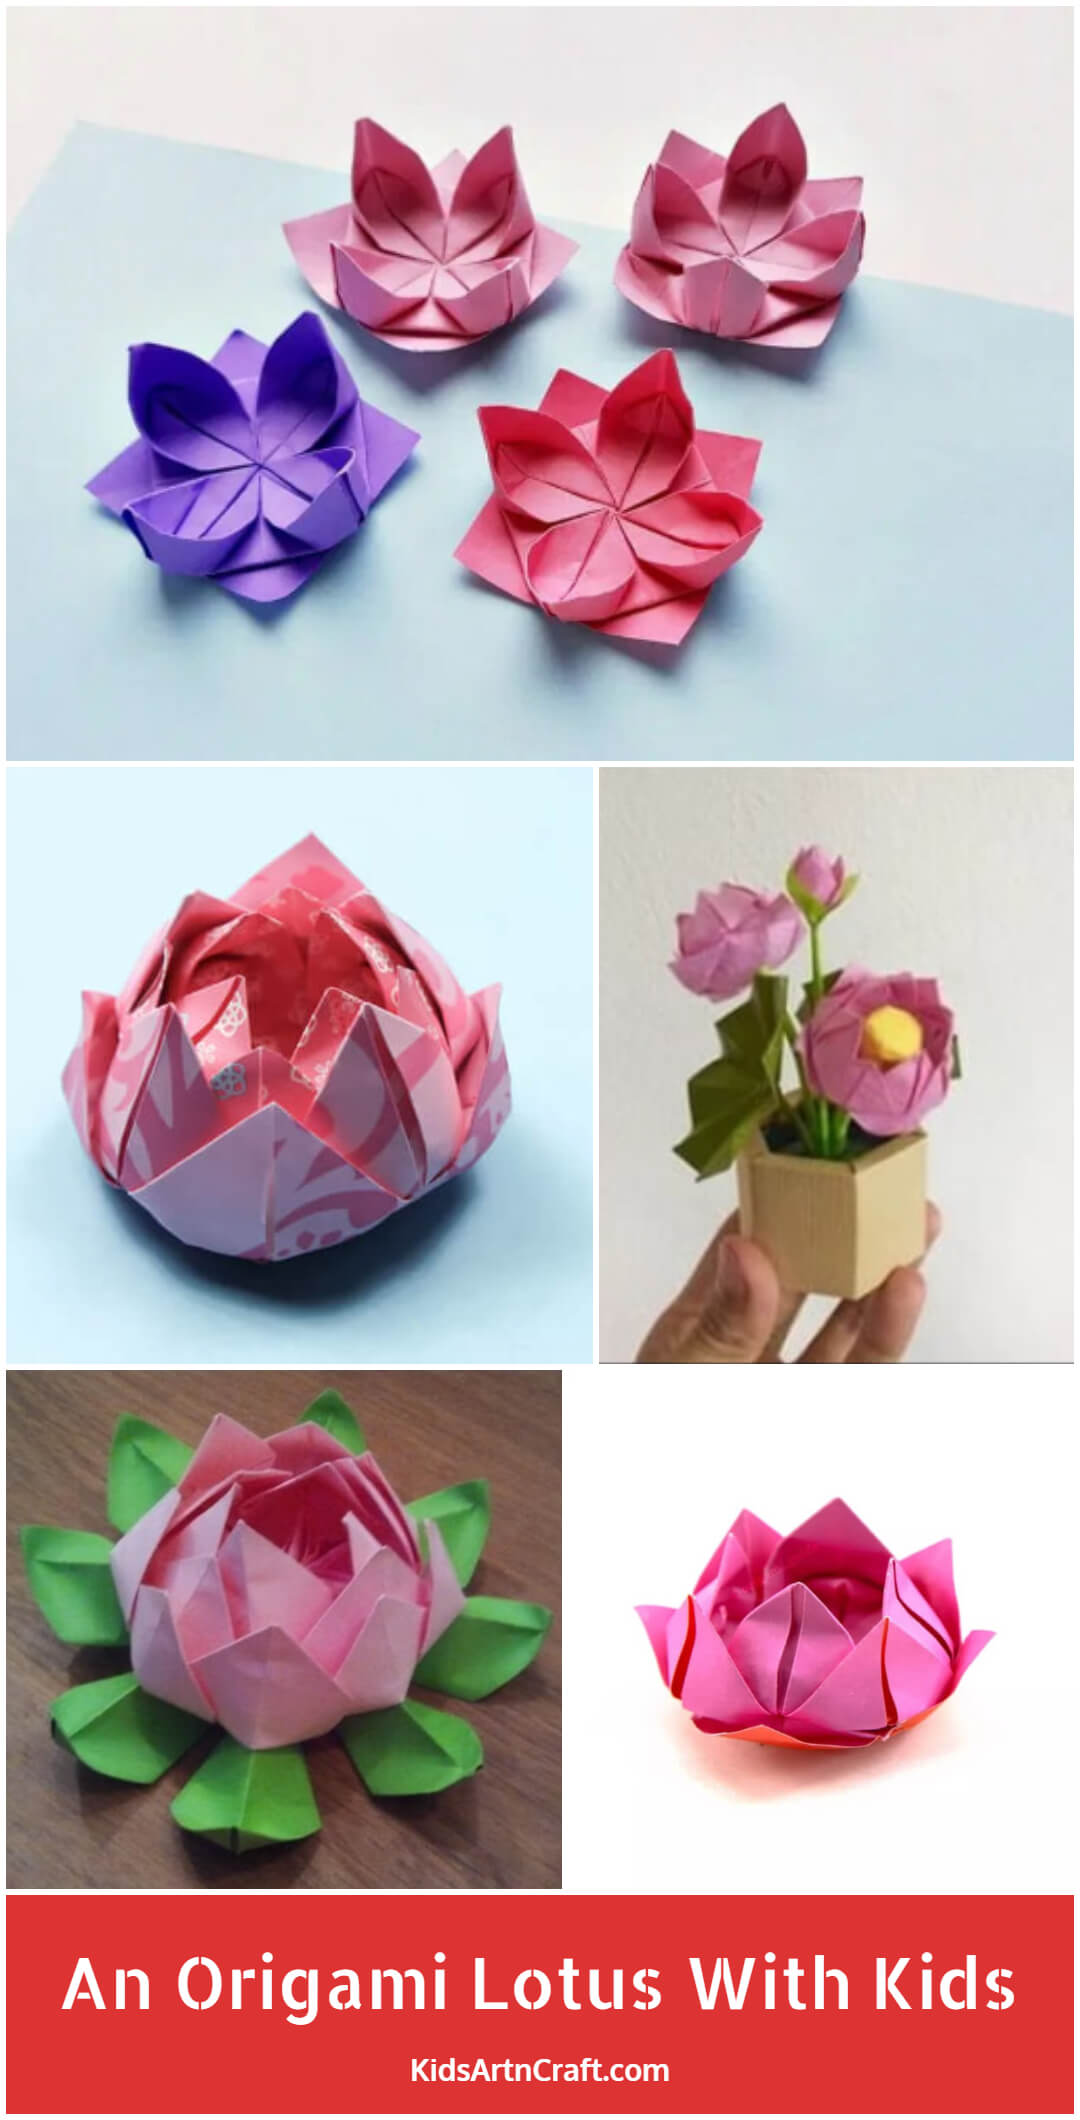 How To Make An Origami Lotus With Kids